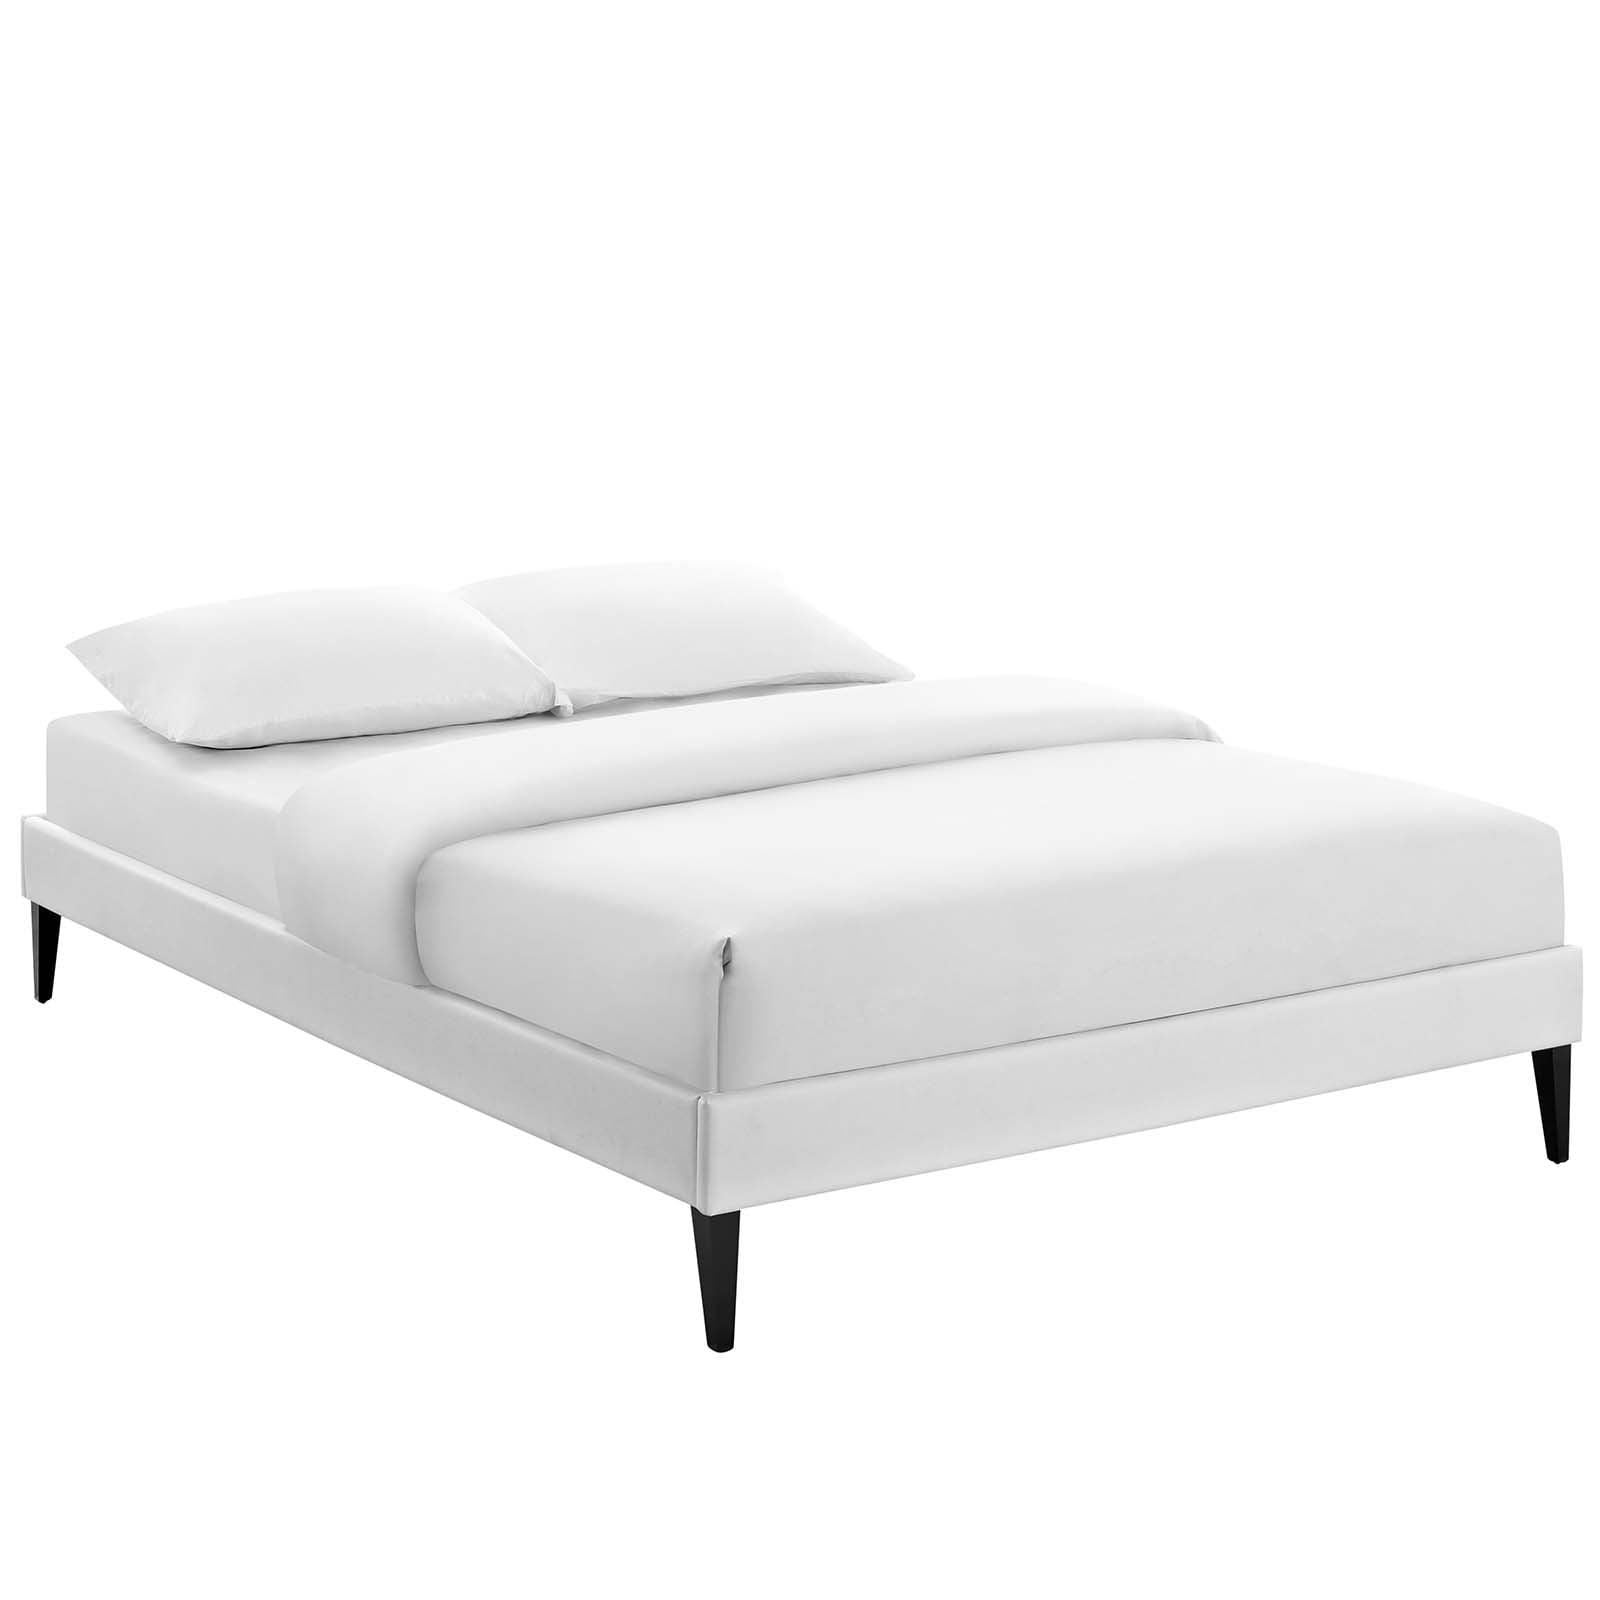 Sleek White Queen Platform Bed with Faux Leather Upholstery